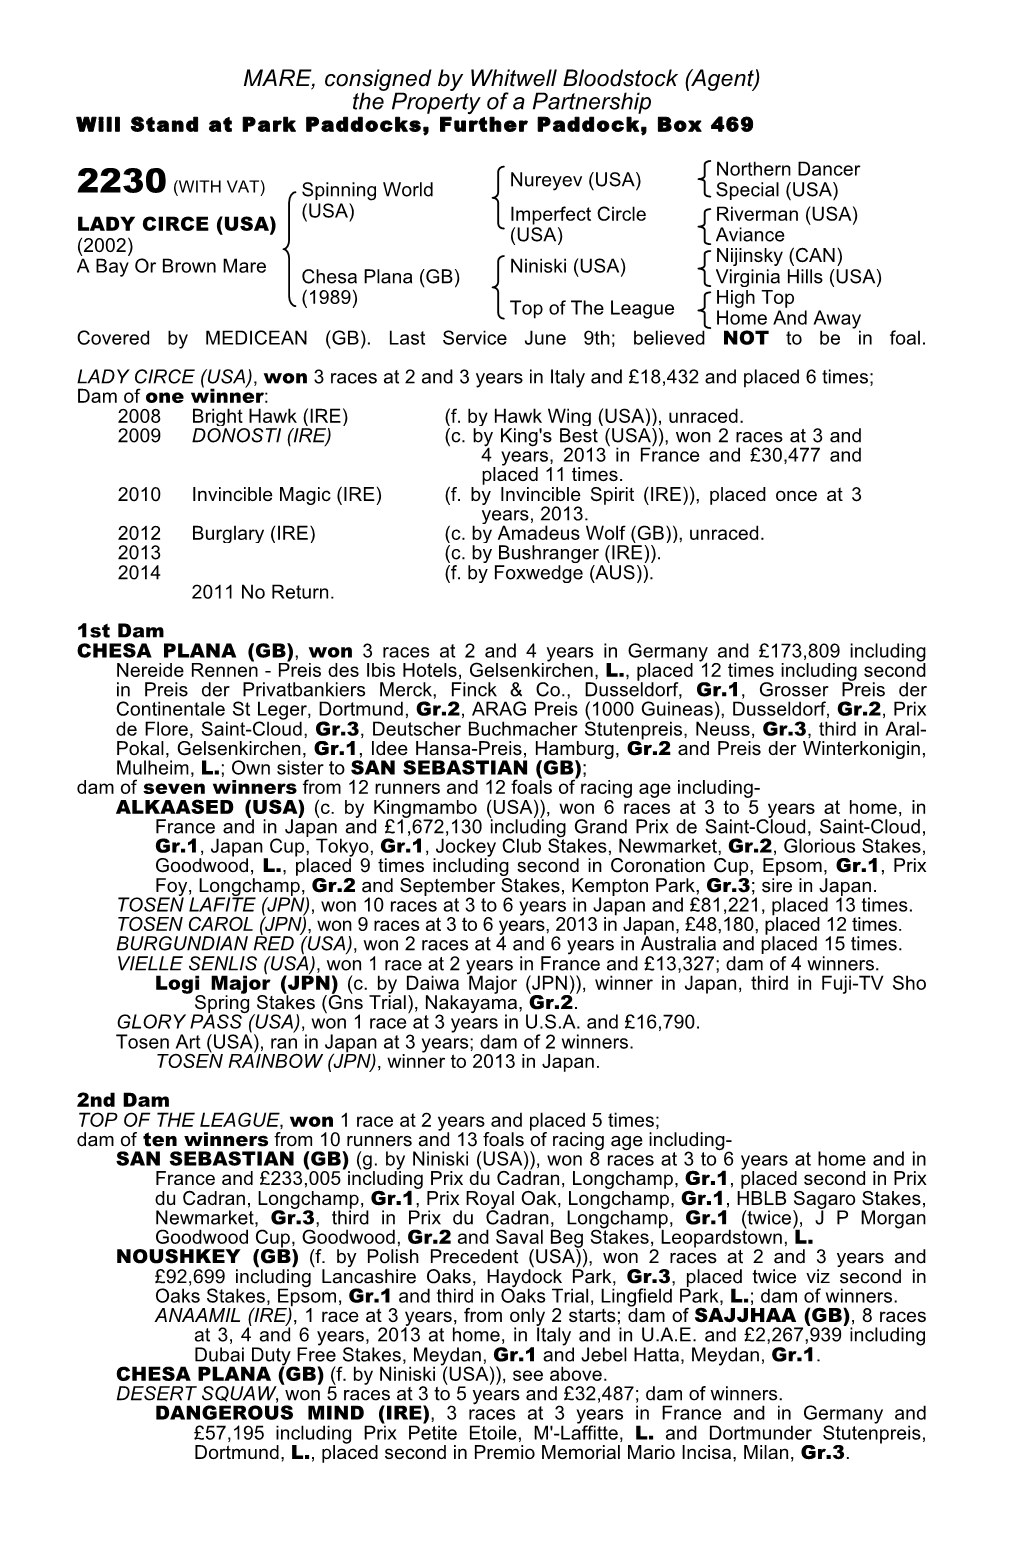 MARE, Consigned by Whitwell Bloodstock (Agent) the Property of a Partnership Will Stand at Park Paddocks, Further Paddock, Box 469